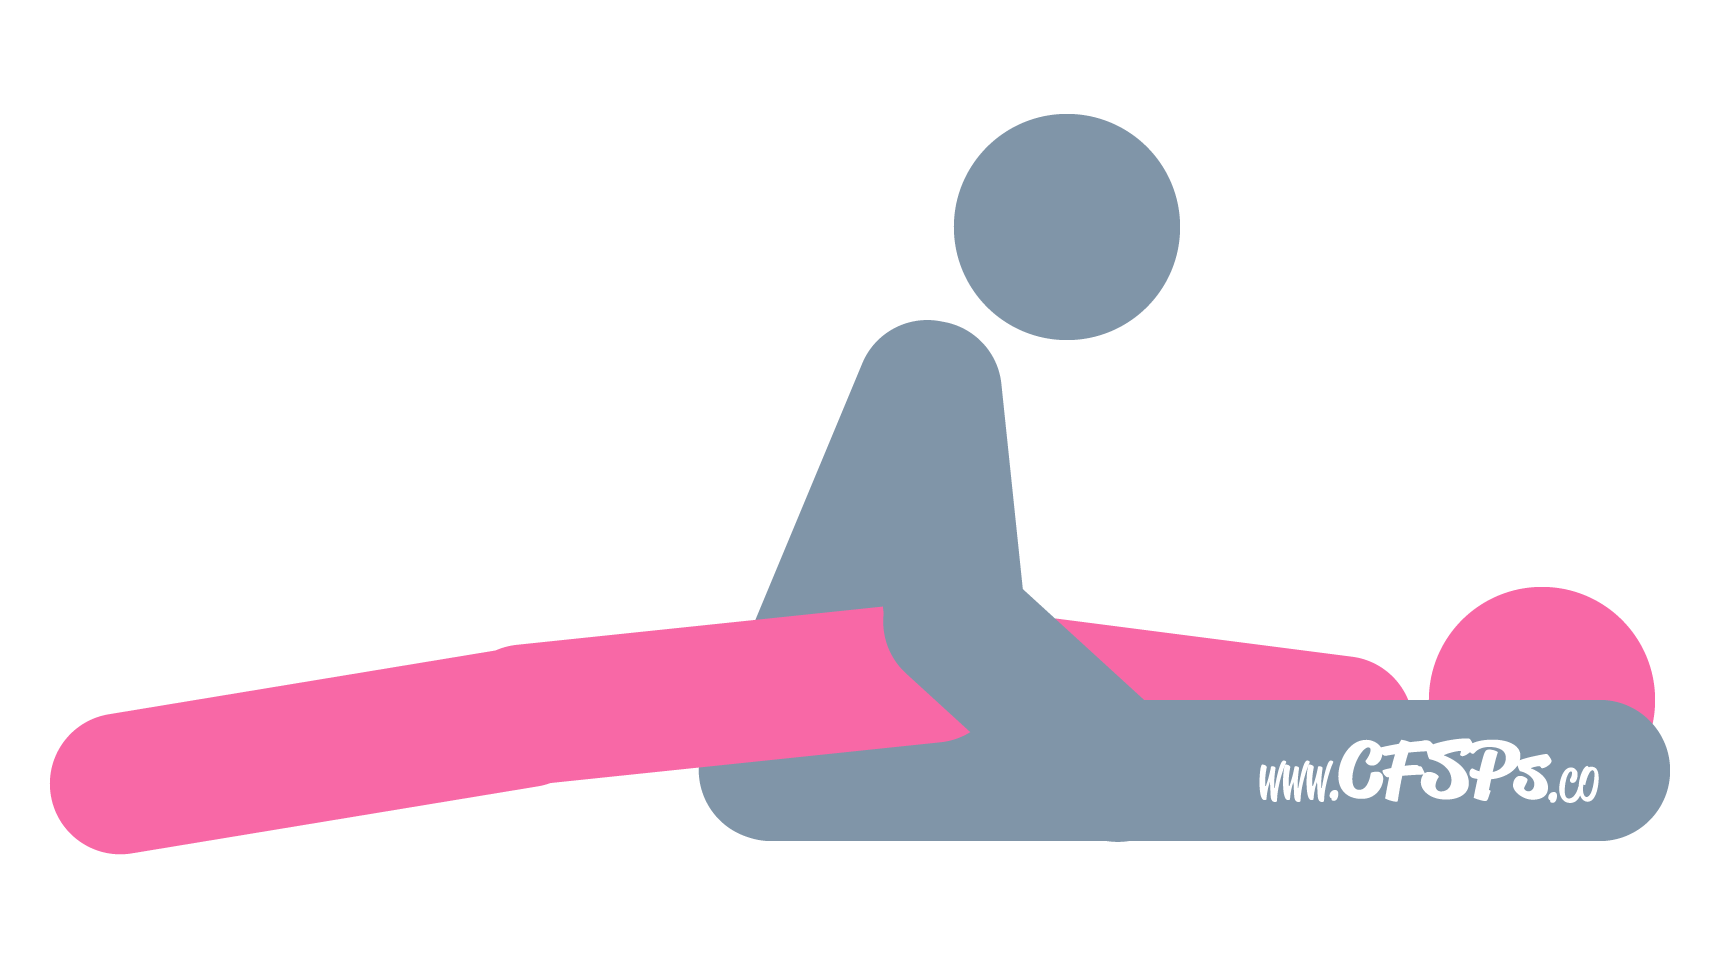 This stick figure image depicts a man and woman having sex in the Glowing Juniper sex position. The man is sitting with his legs open. The woman is lying on her back with her pelvis near his, her legs open wide, and his feet near her shoulders.